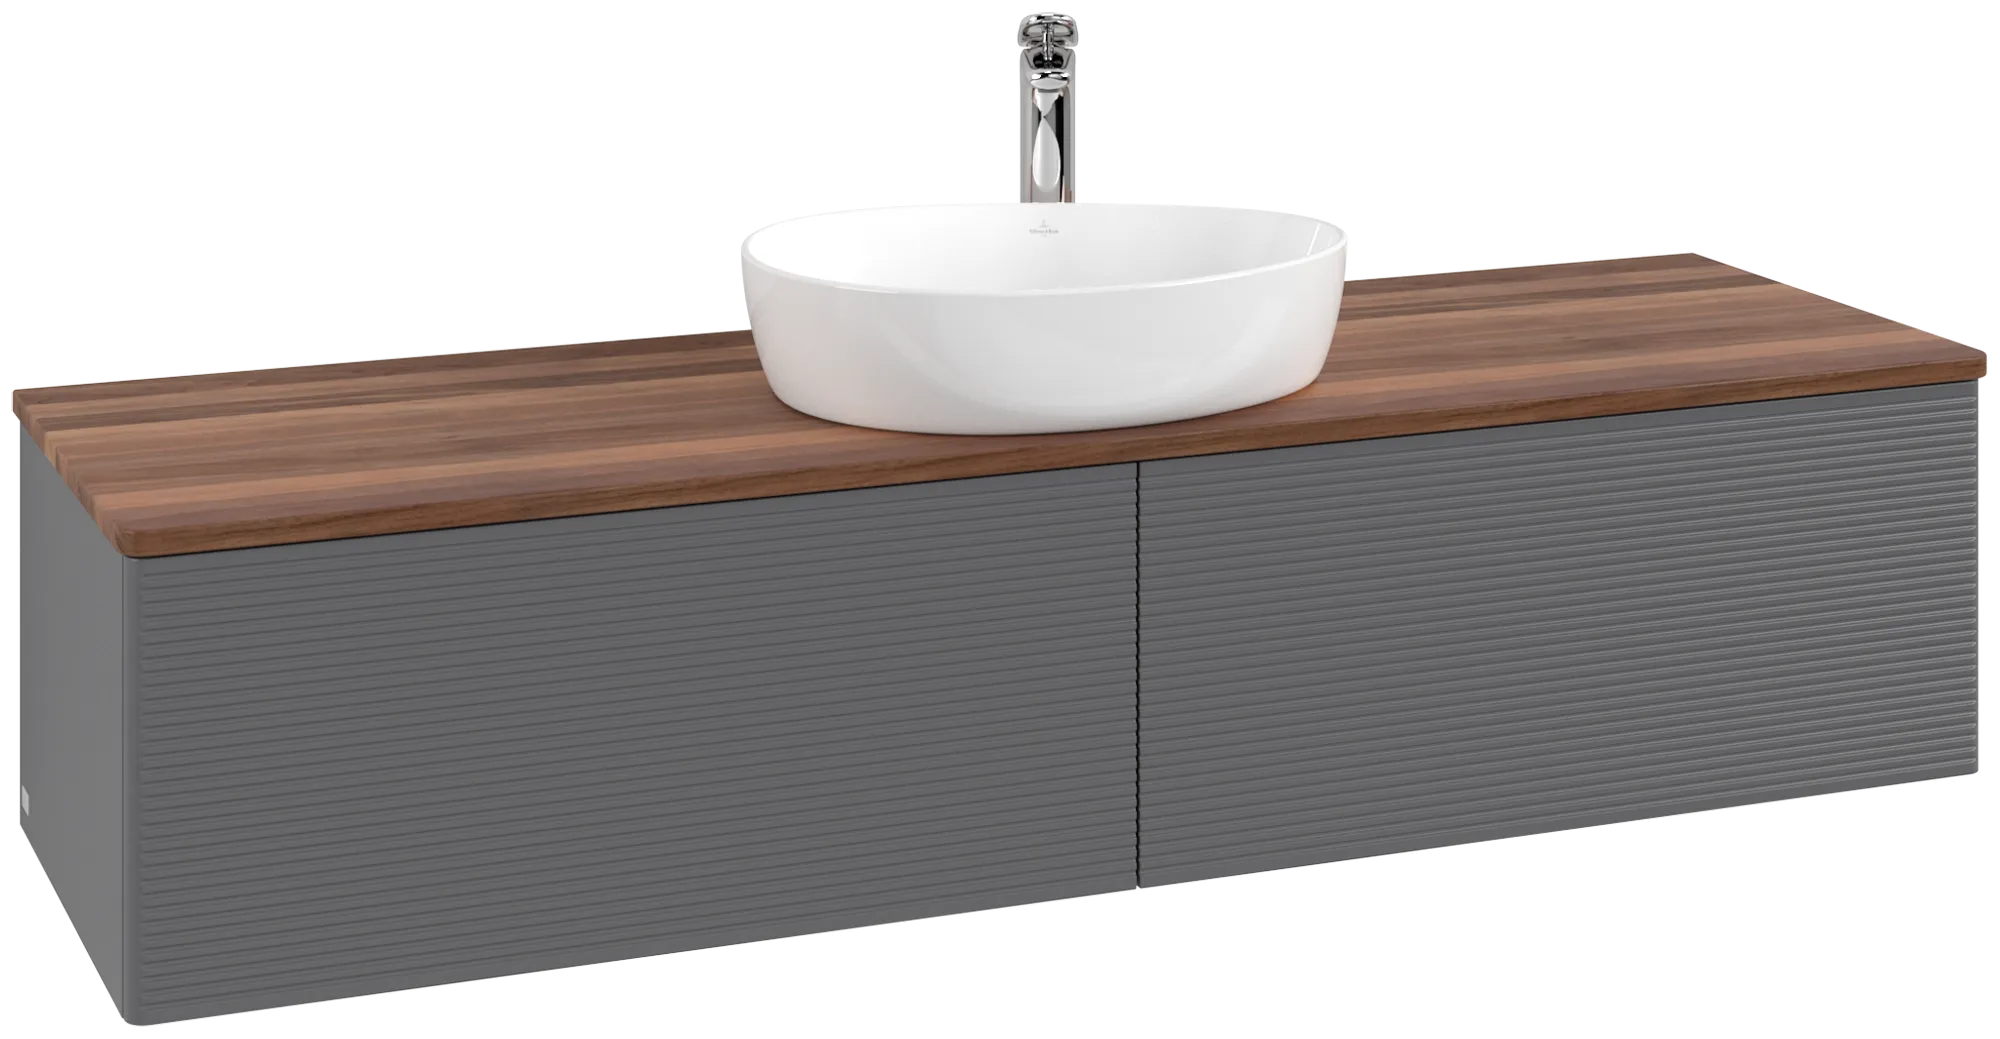 VILLEROY BOCH Antao Vanity unit, 2 pull-out compartments, 1600 x 360 x 500 mm, Front with grain texture, Anthracite Matt Lacquer / Warm Walnut #K36152GK resmi